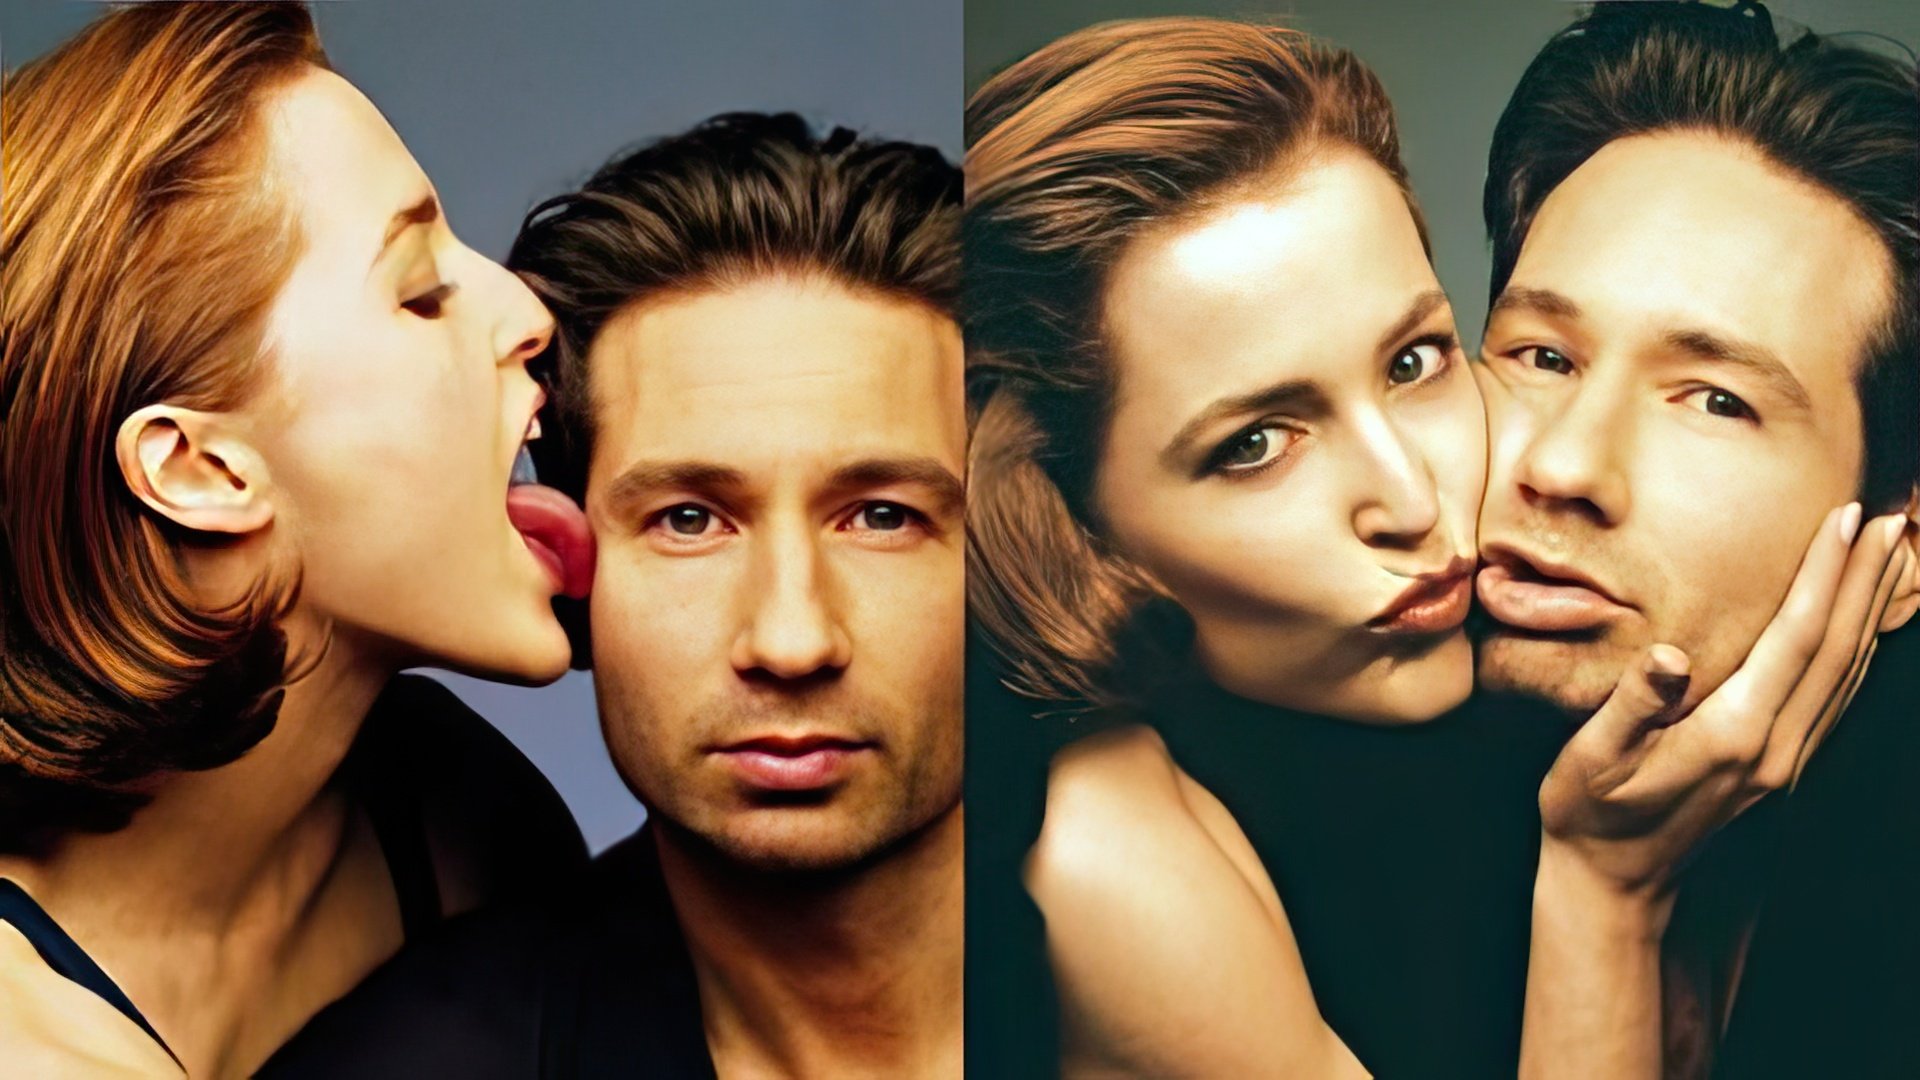 Despite the inevitable rumors, Gillian Anderson and David Duchovny didn’t date in life